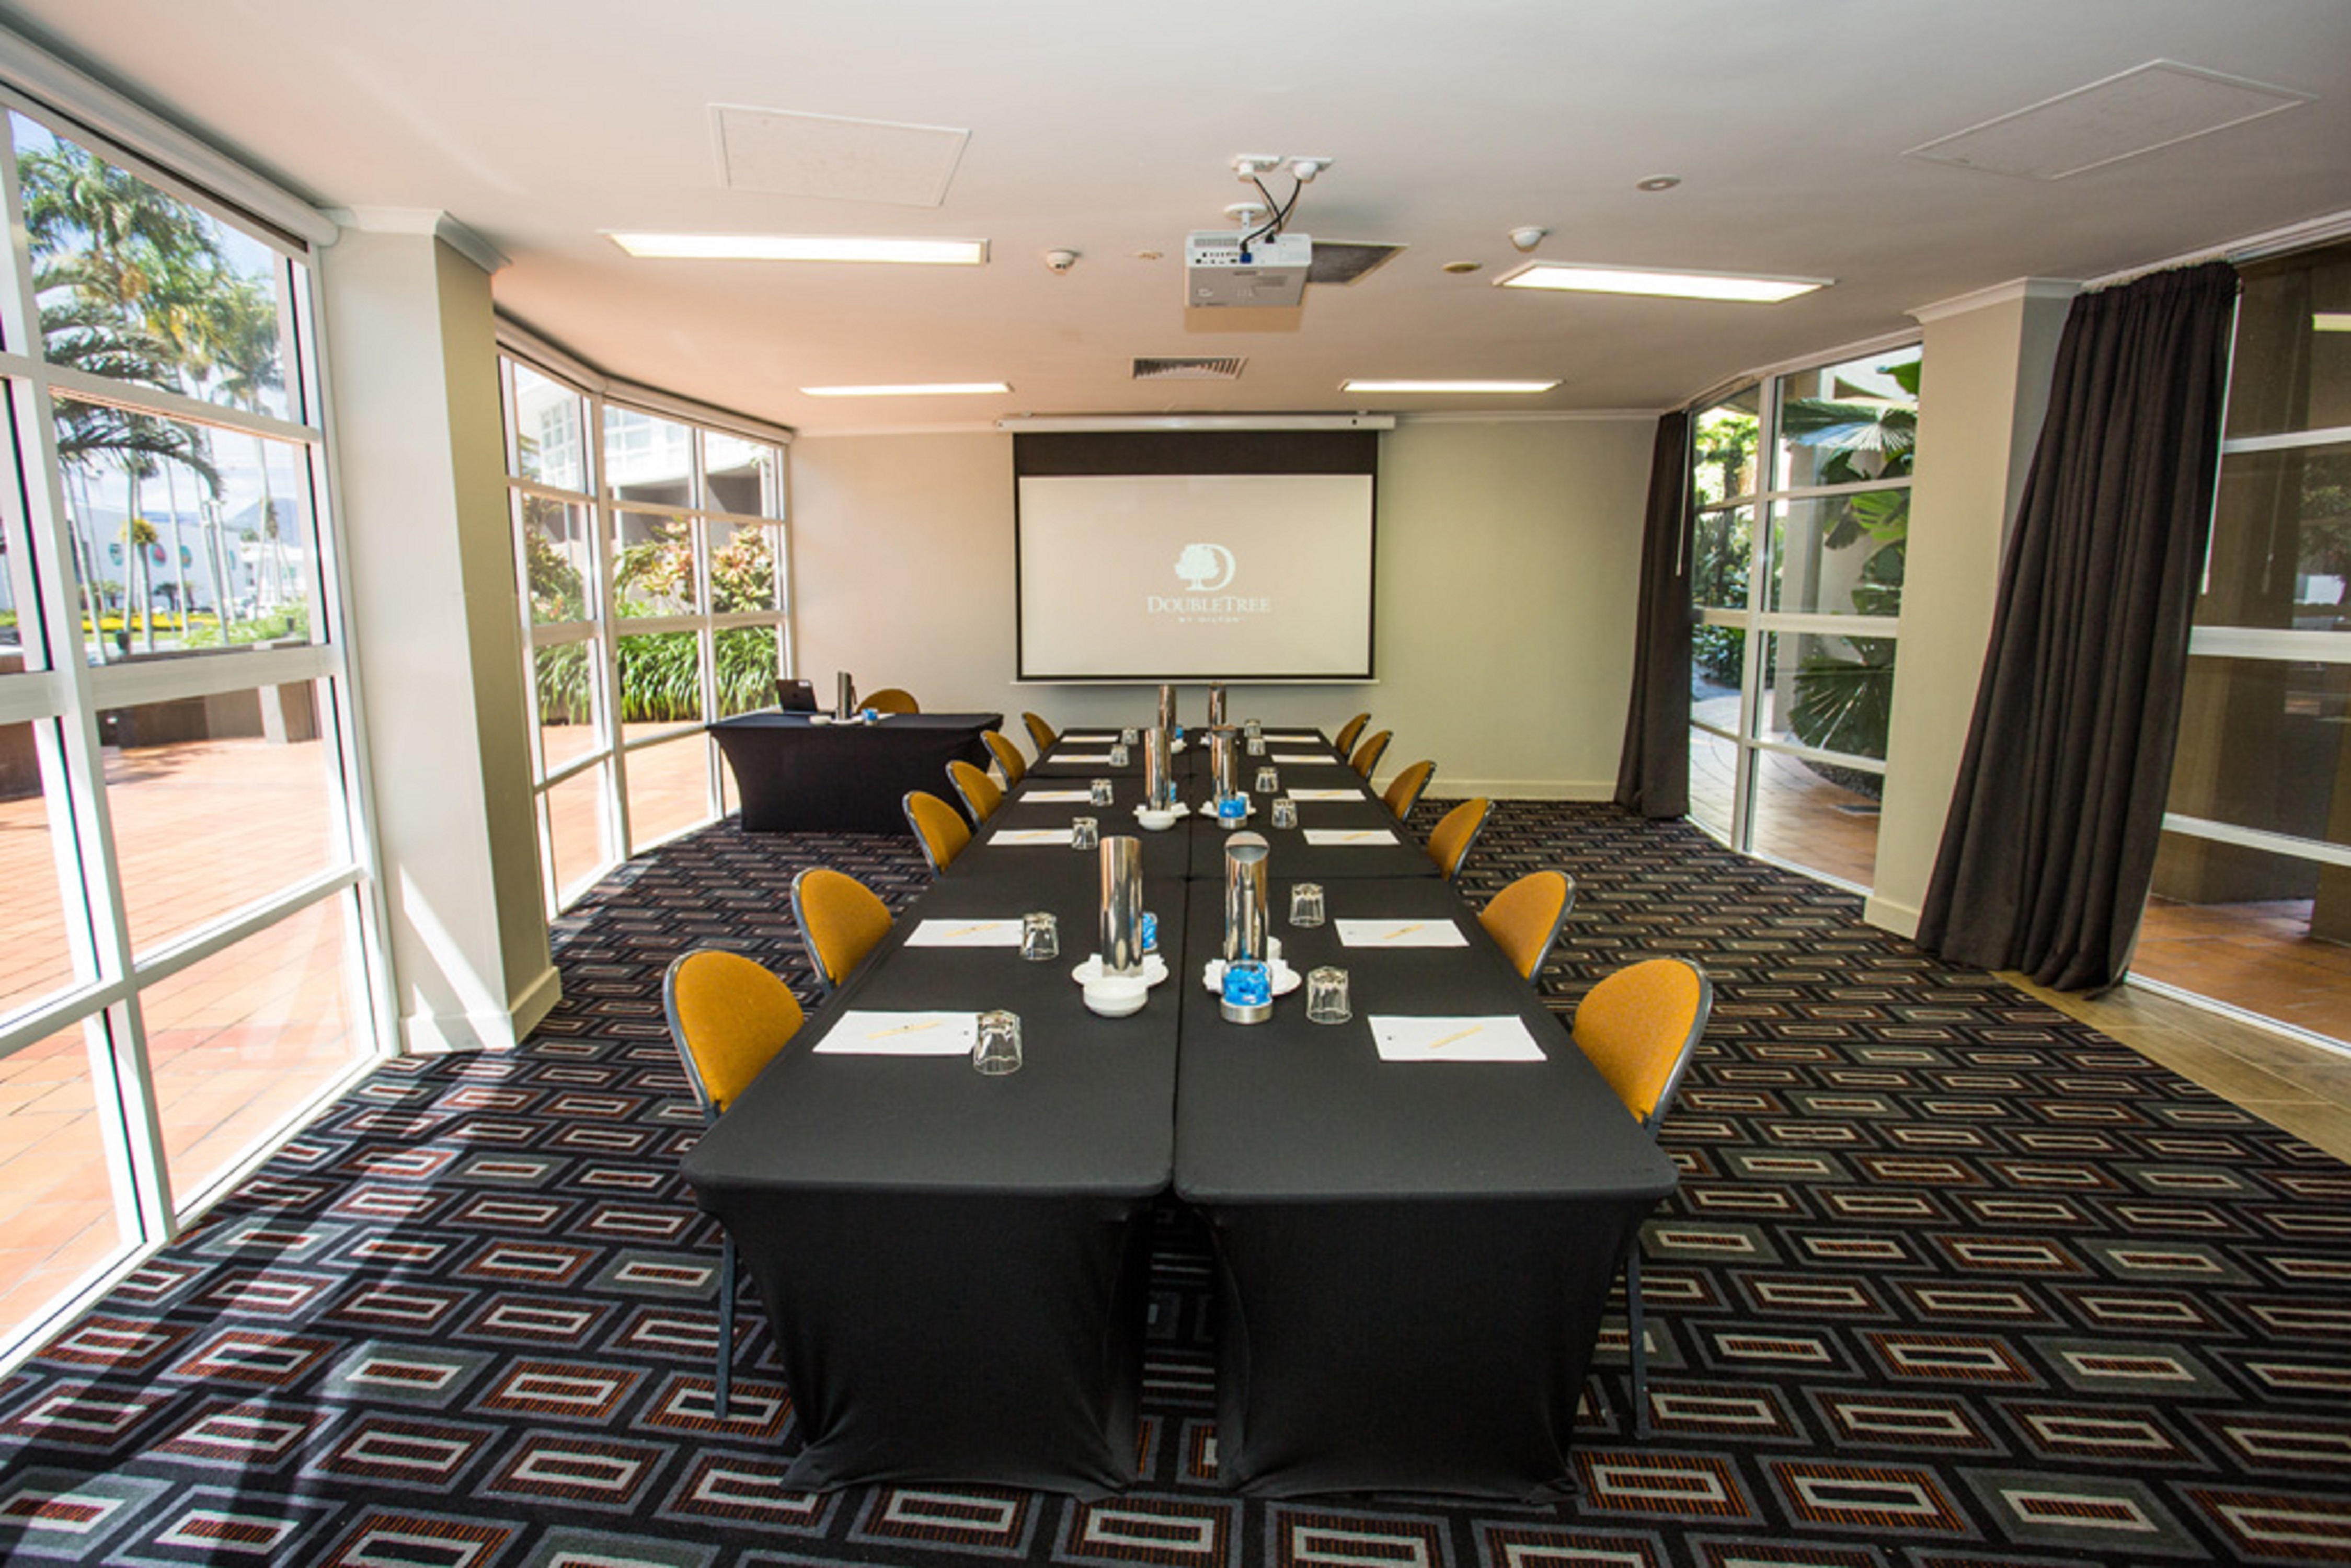 Meeting Room with Tables, Chairs and Projector Screen